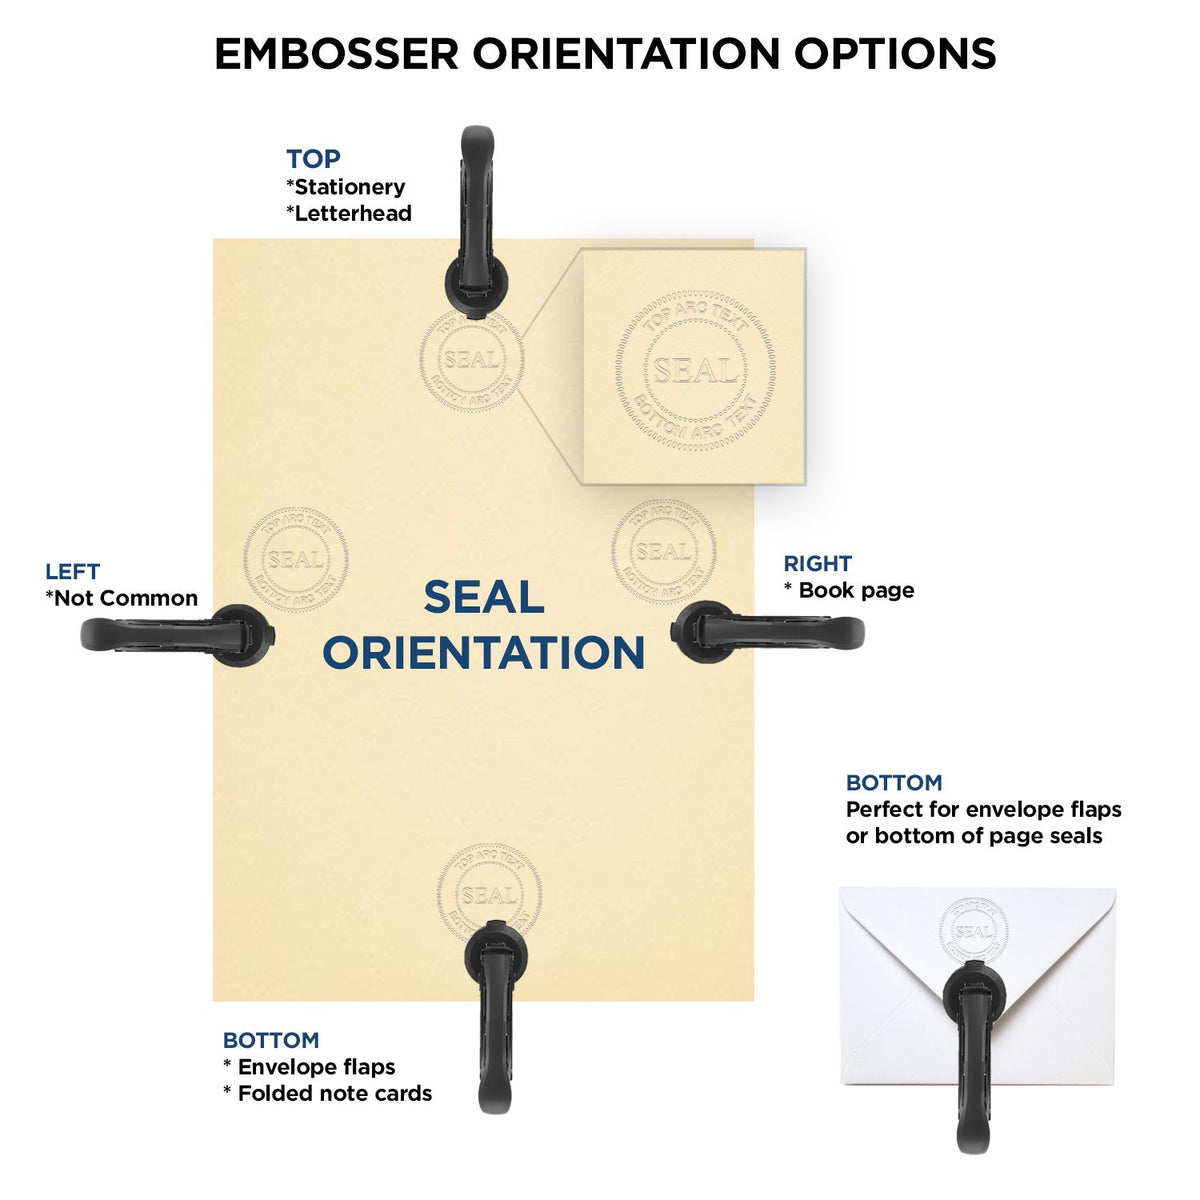 An infographic for the Heavy Duty Cast Iron Alabama Architect Embosser showing embosser orientation, this is showing examples of a top, bottom, right and left insert.